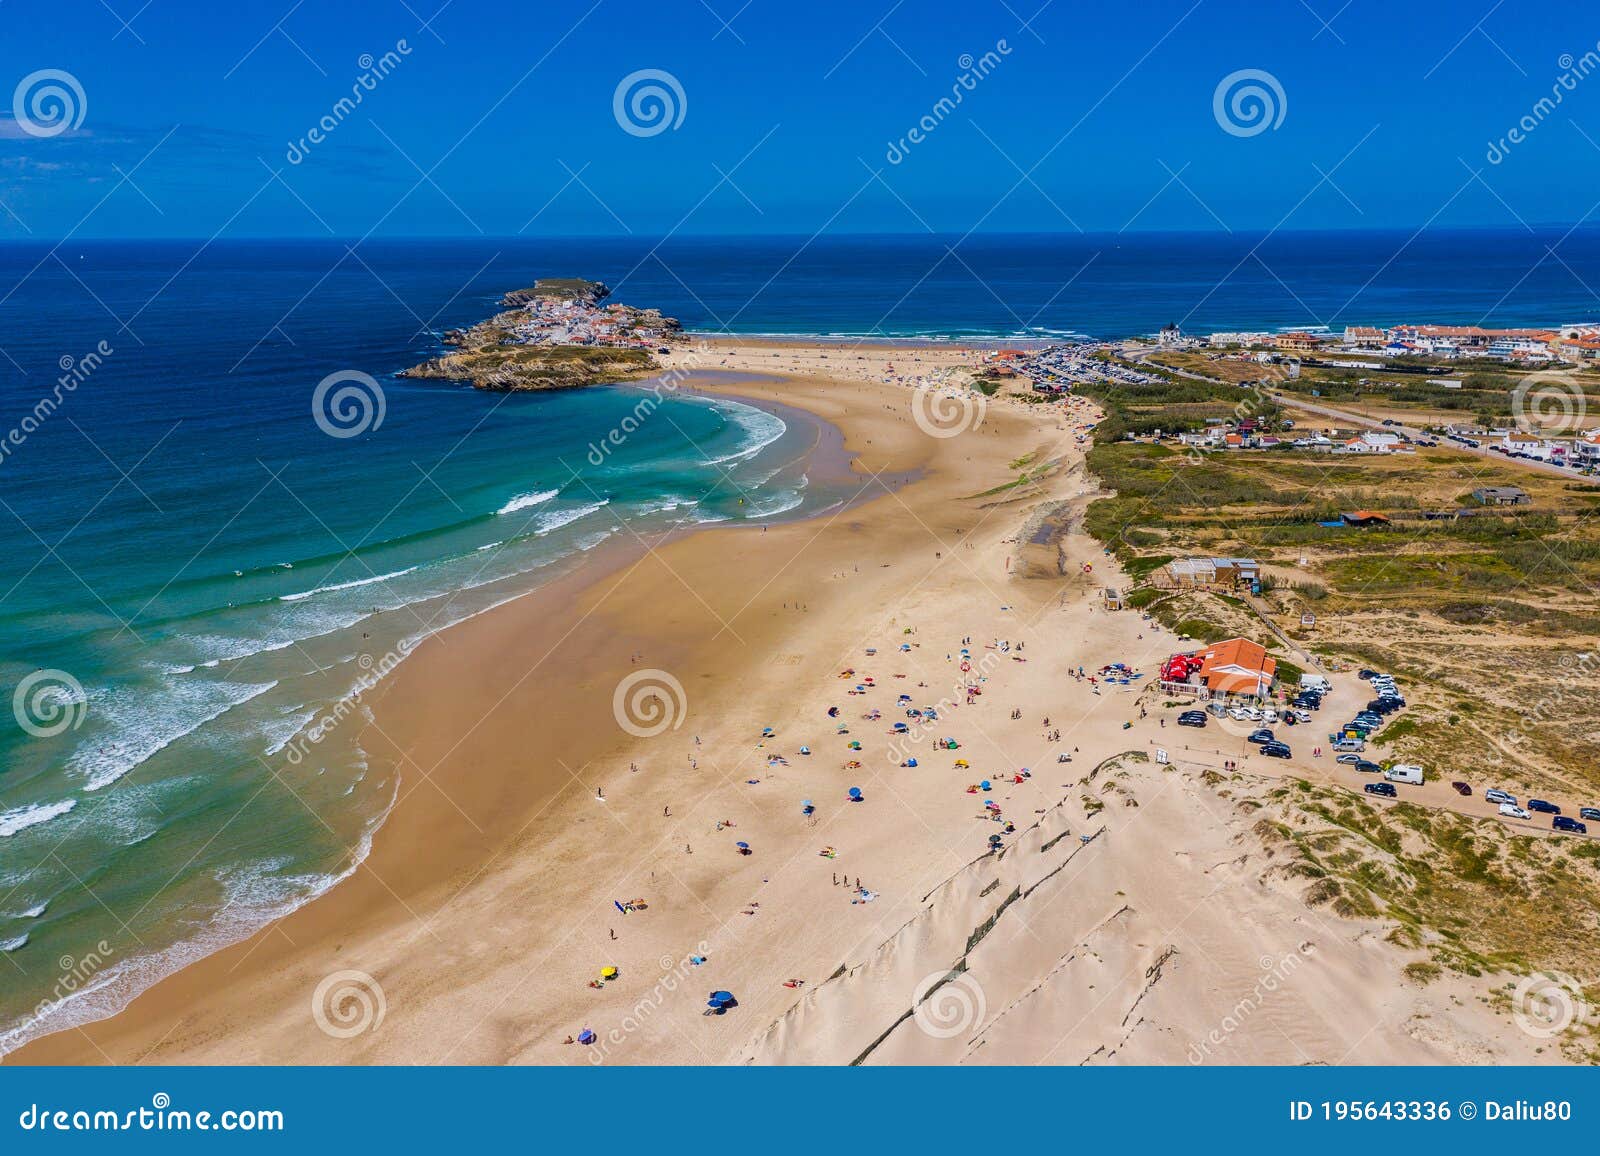 campismo beach and dunas beach and island baleal near peniche on the shore of the atlantic ocean in west coast of portugal.